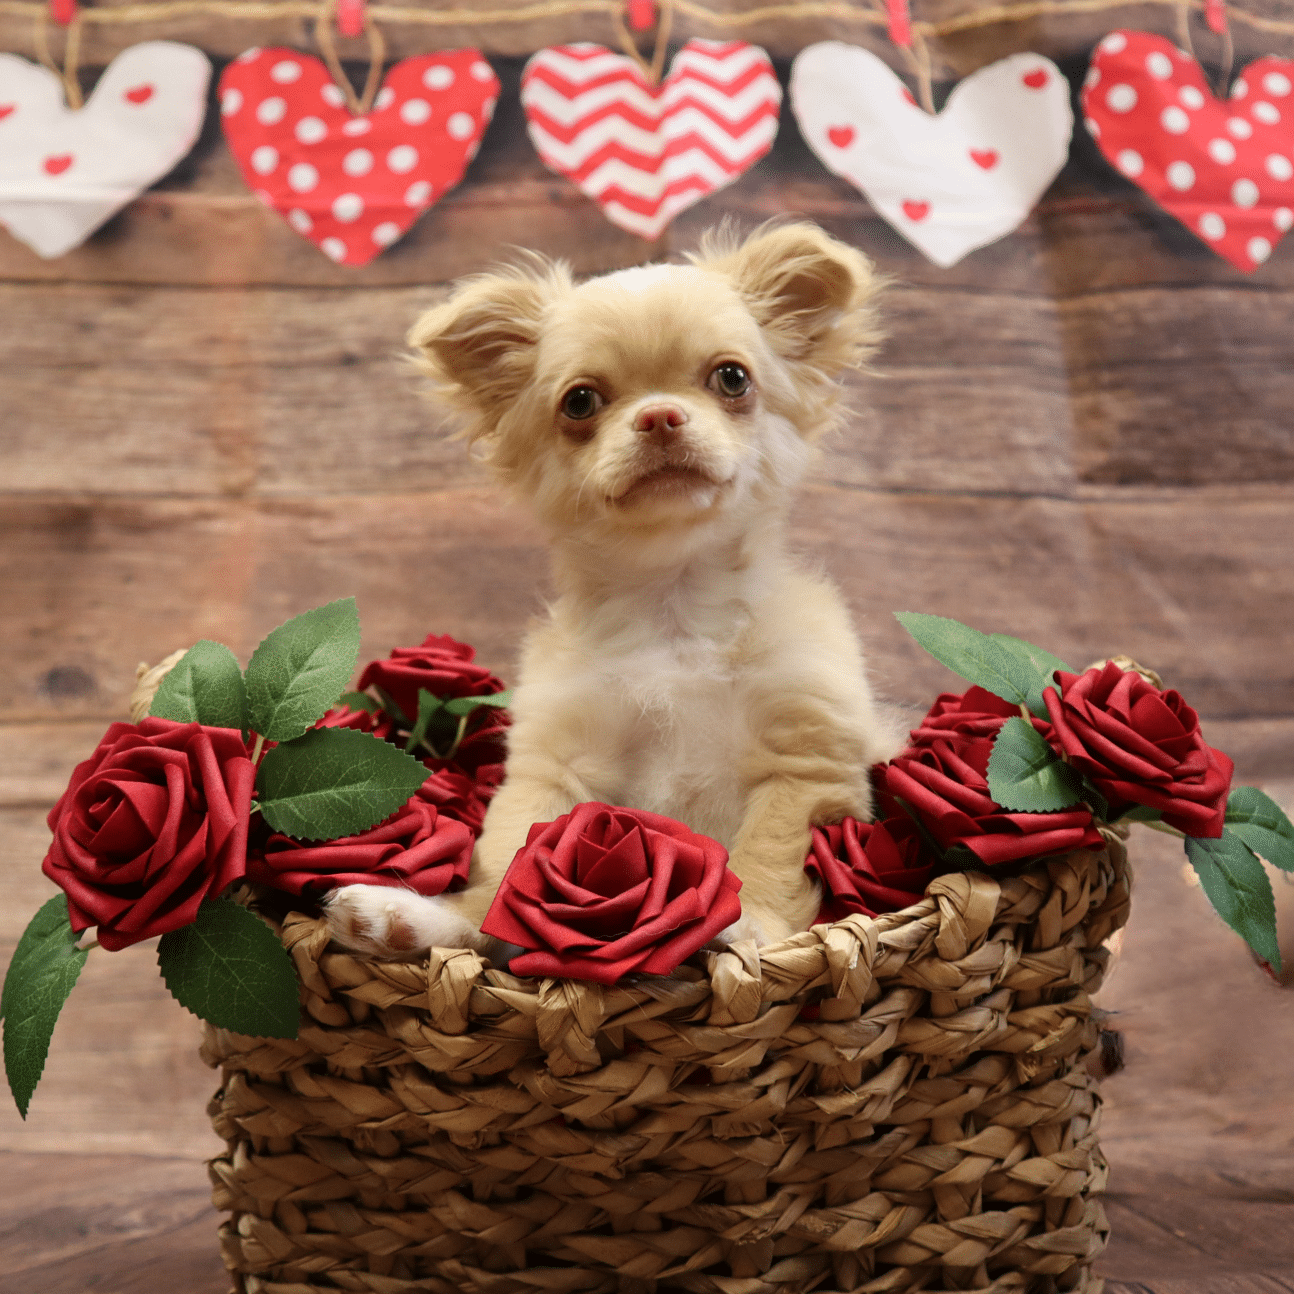 Small dog in a basket or roses